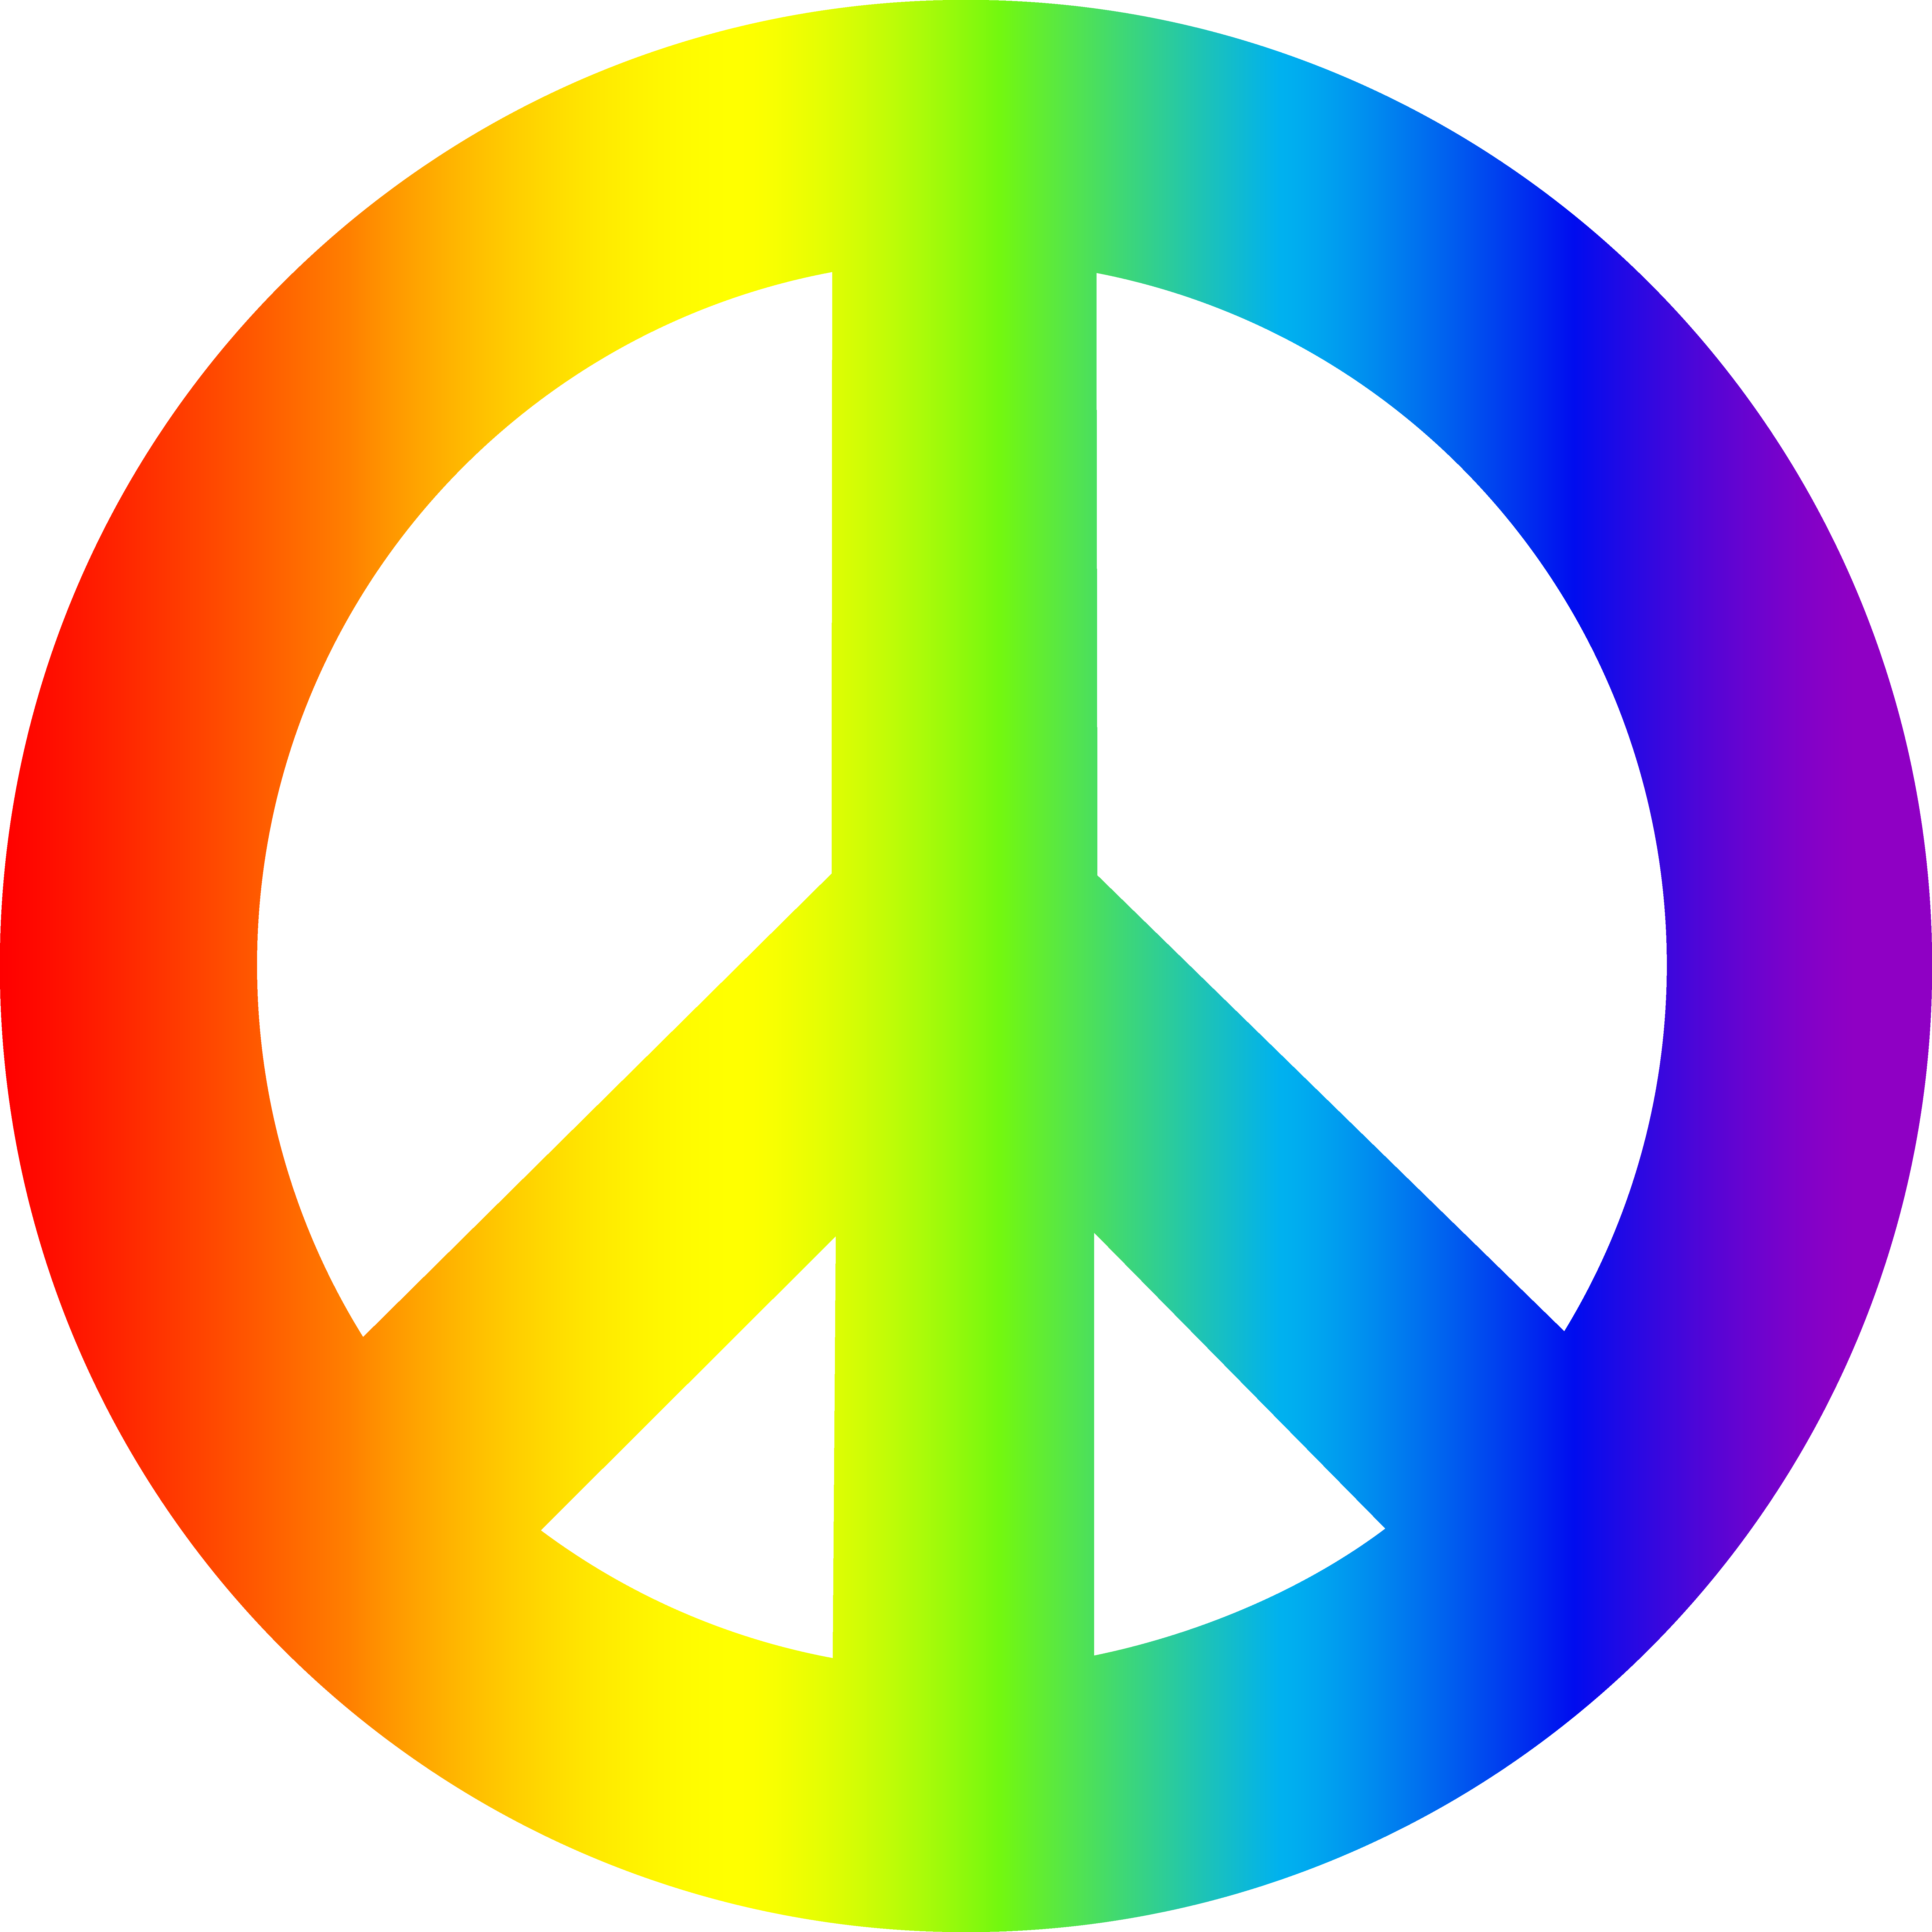 Colorful Peace Sign Clipart - 7192x7192 Wallpaper 